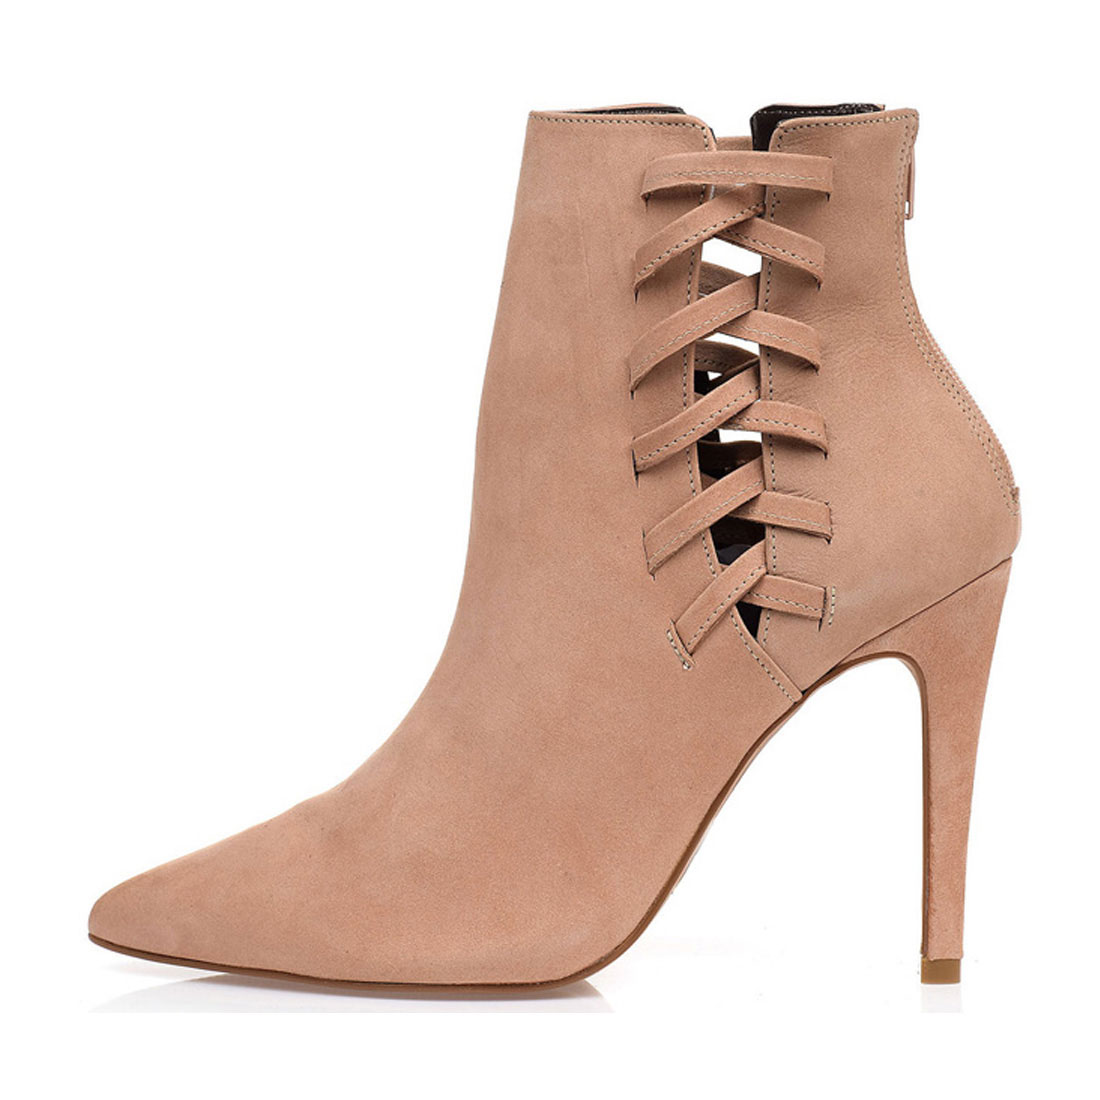 Really suede leather pointed winter high heel dress ladies ankle boot ...